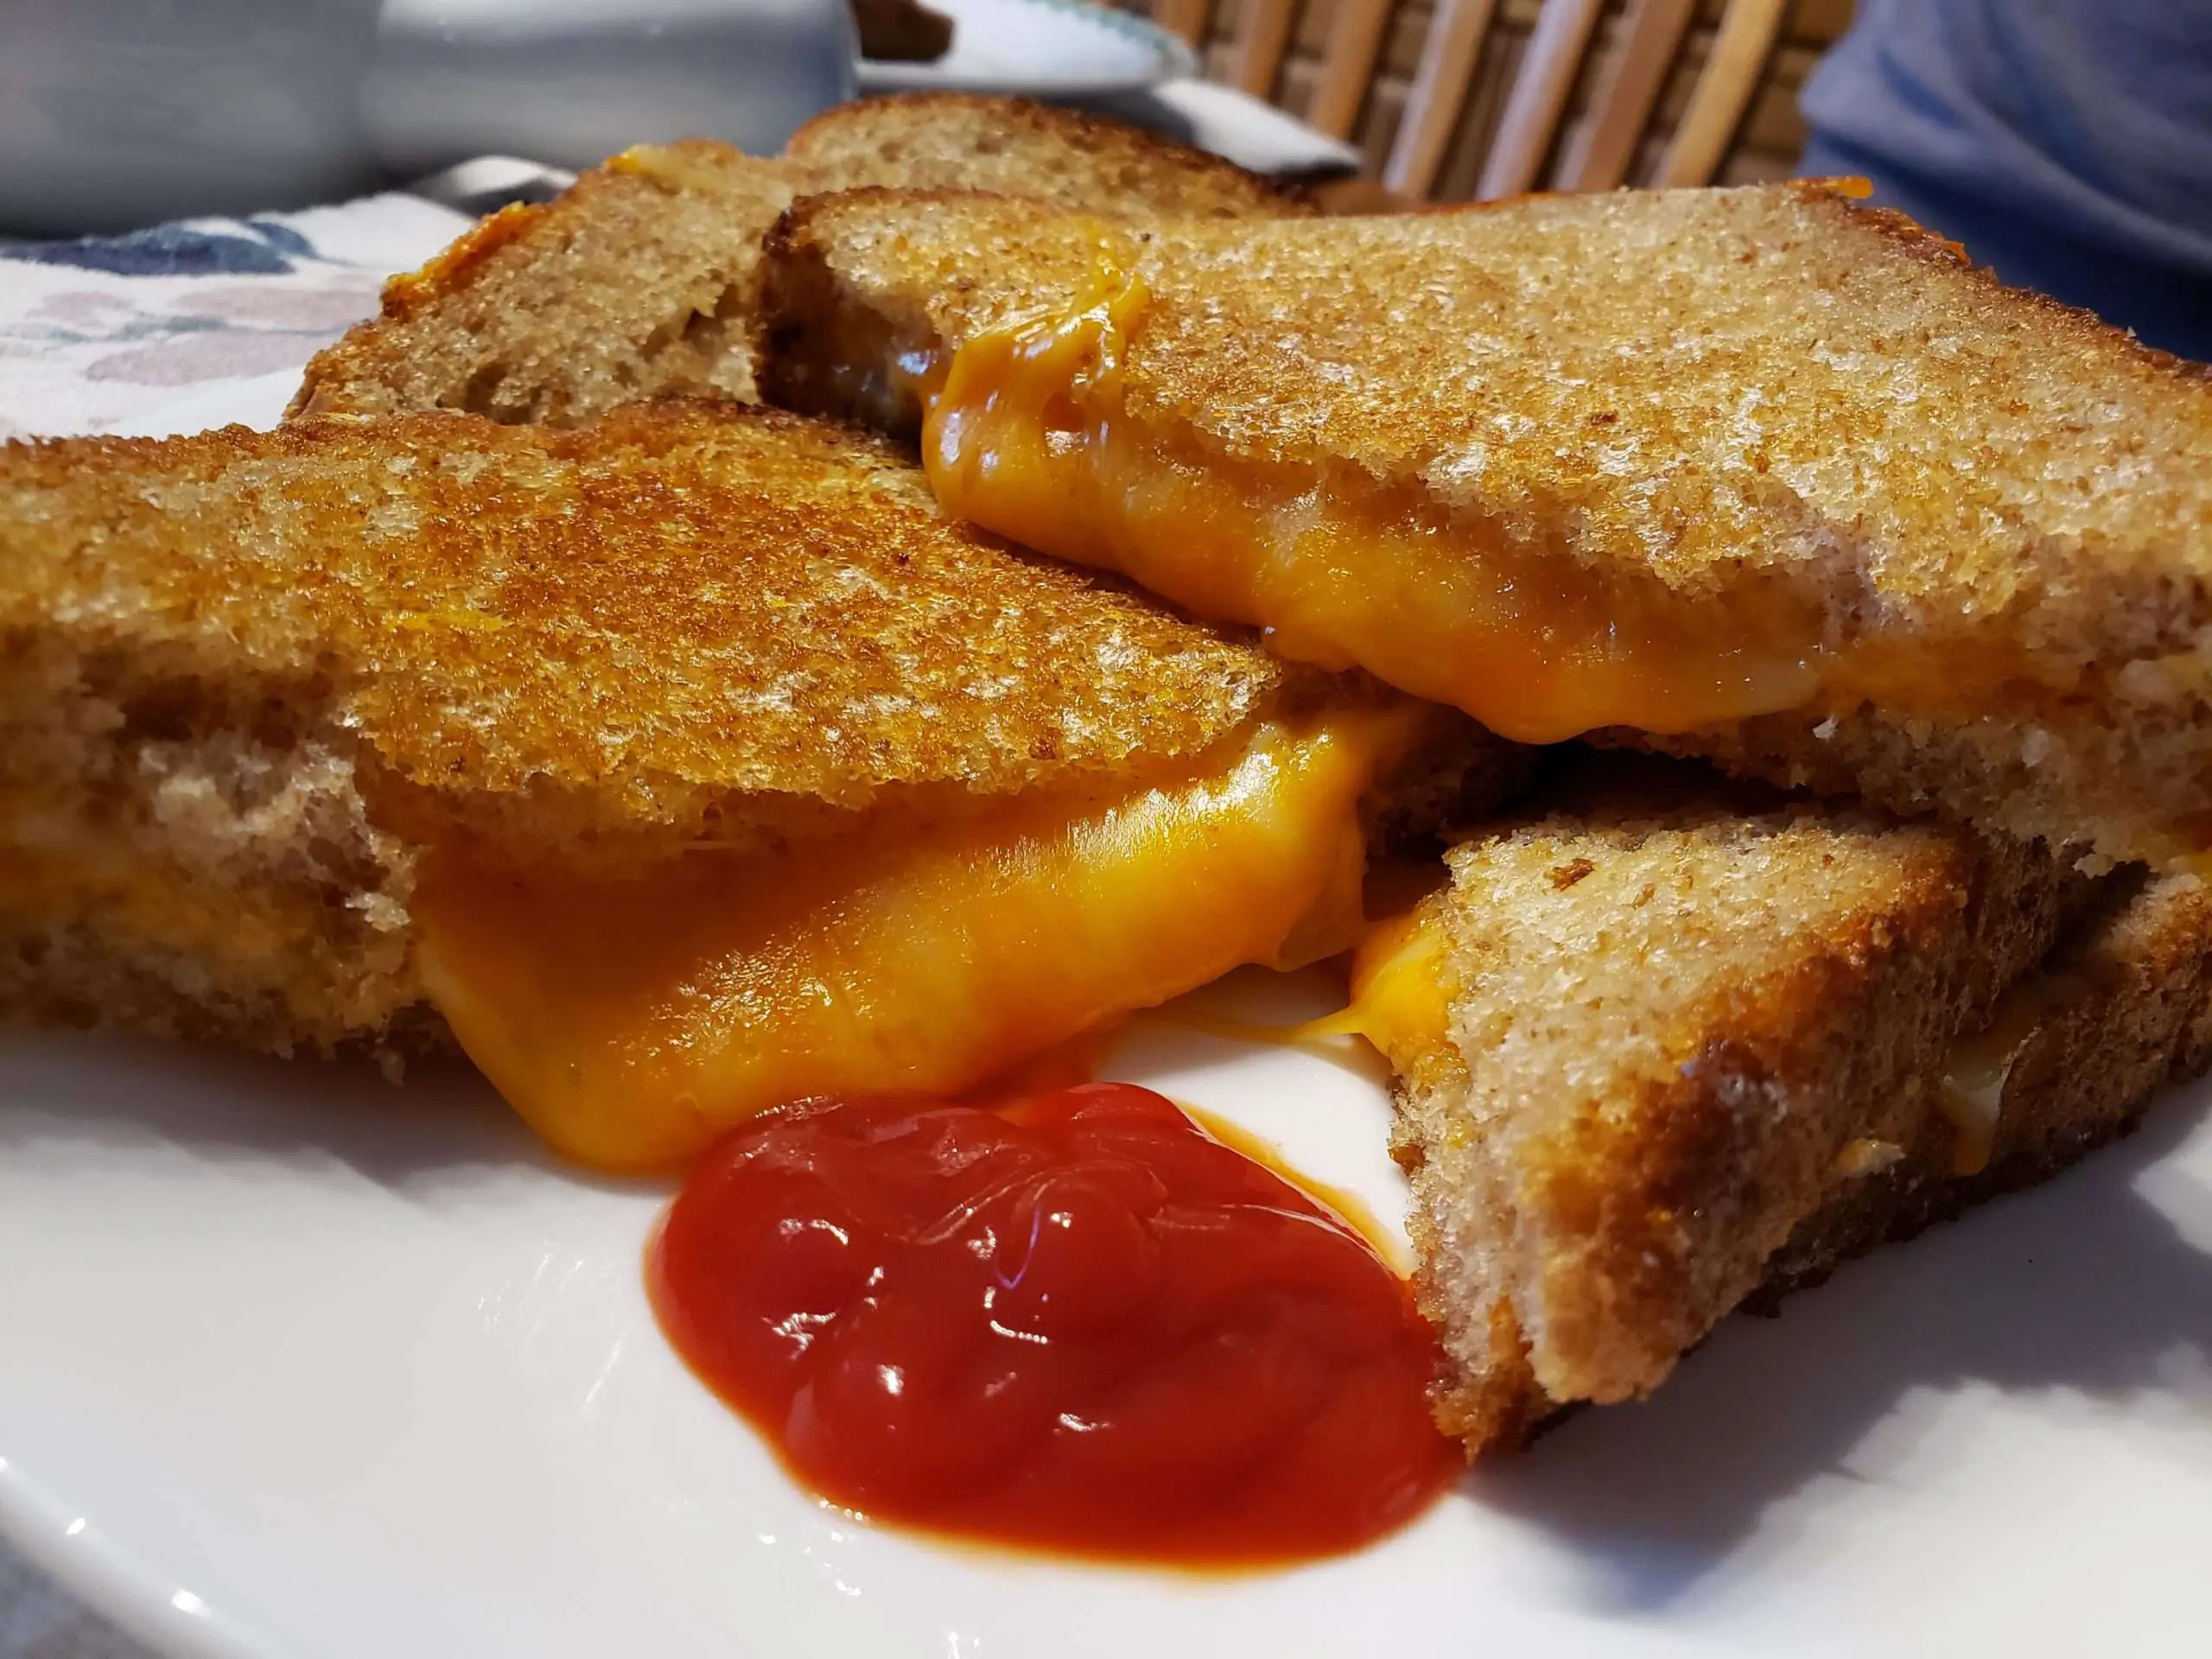 Ooey gooey grilled cheese sandwiches